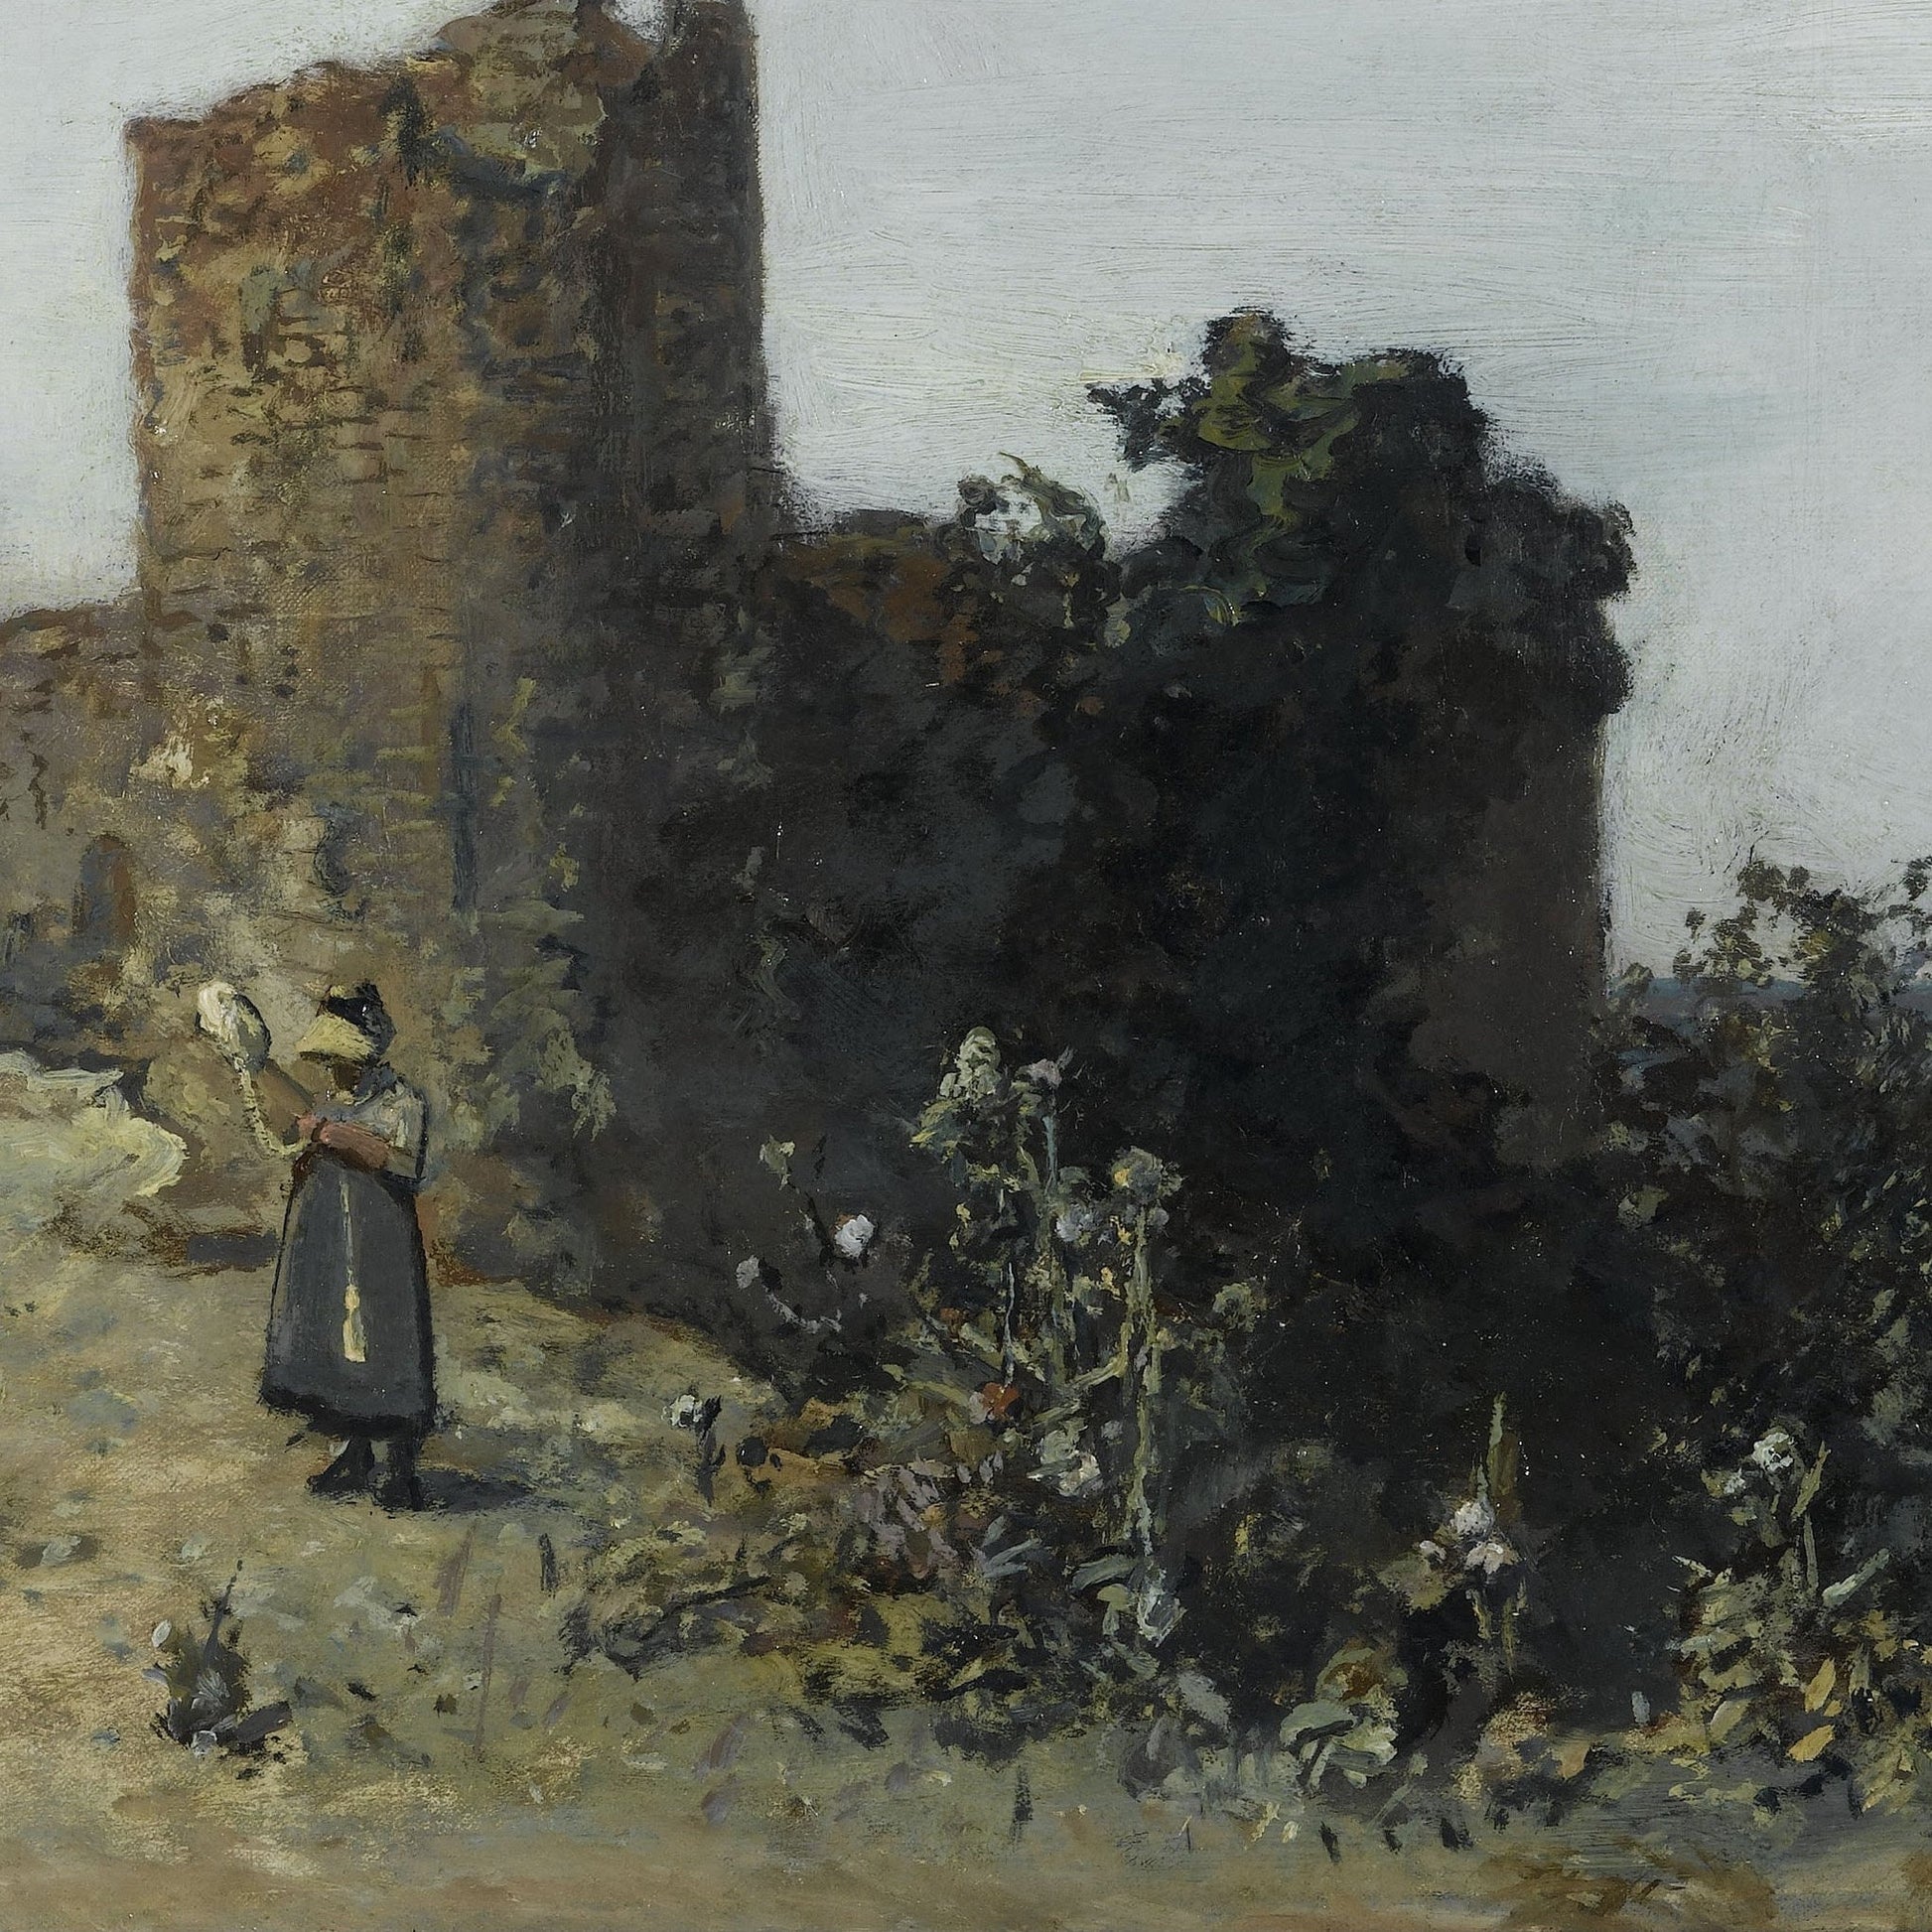 Ruins of the Rosemont castle by Johan Jongkind, Essex, 3d Printed with texture and brush strokes looks like original oil-painting, code:415